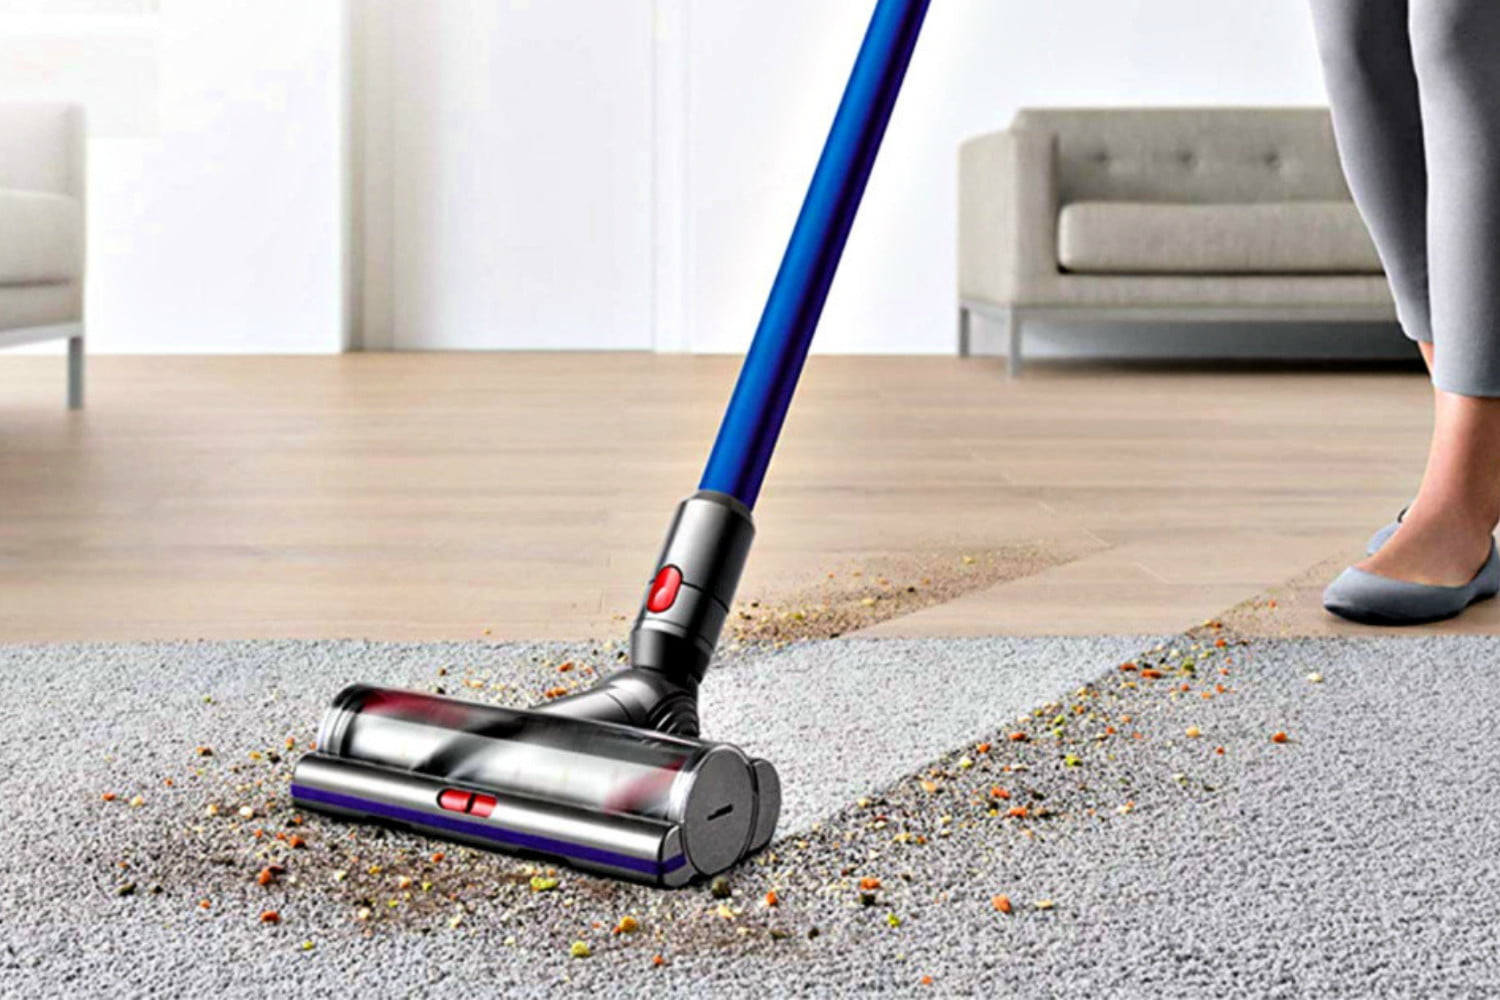 Best affordable Dyson Vaccum and fan deals in May 2021